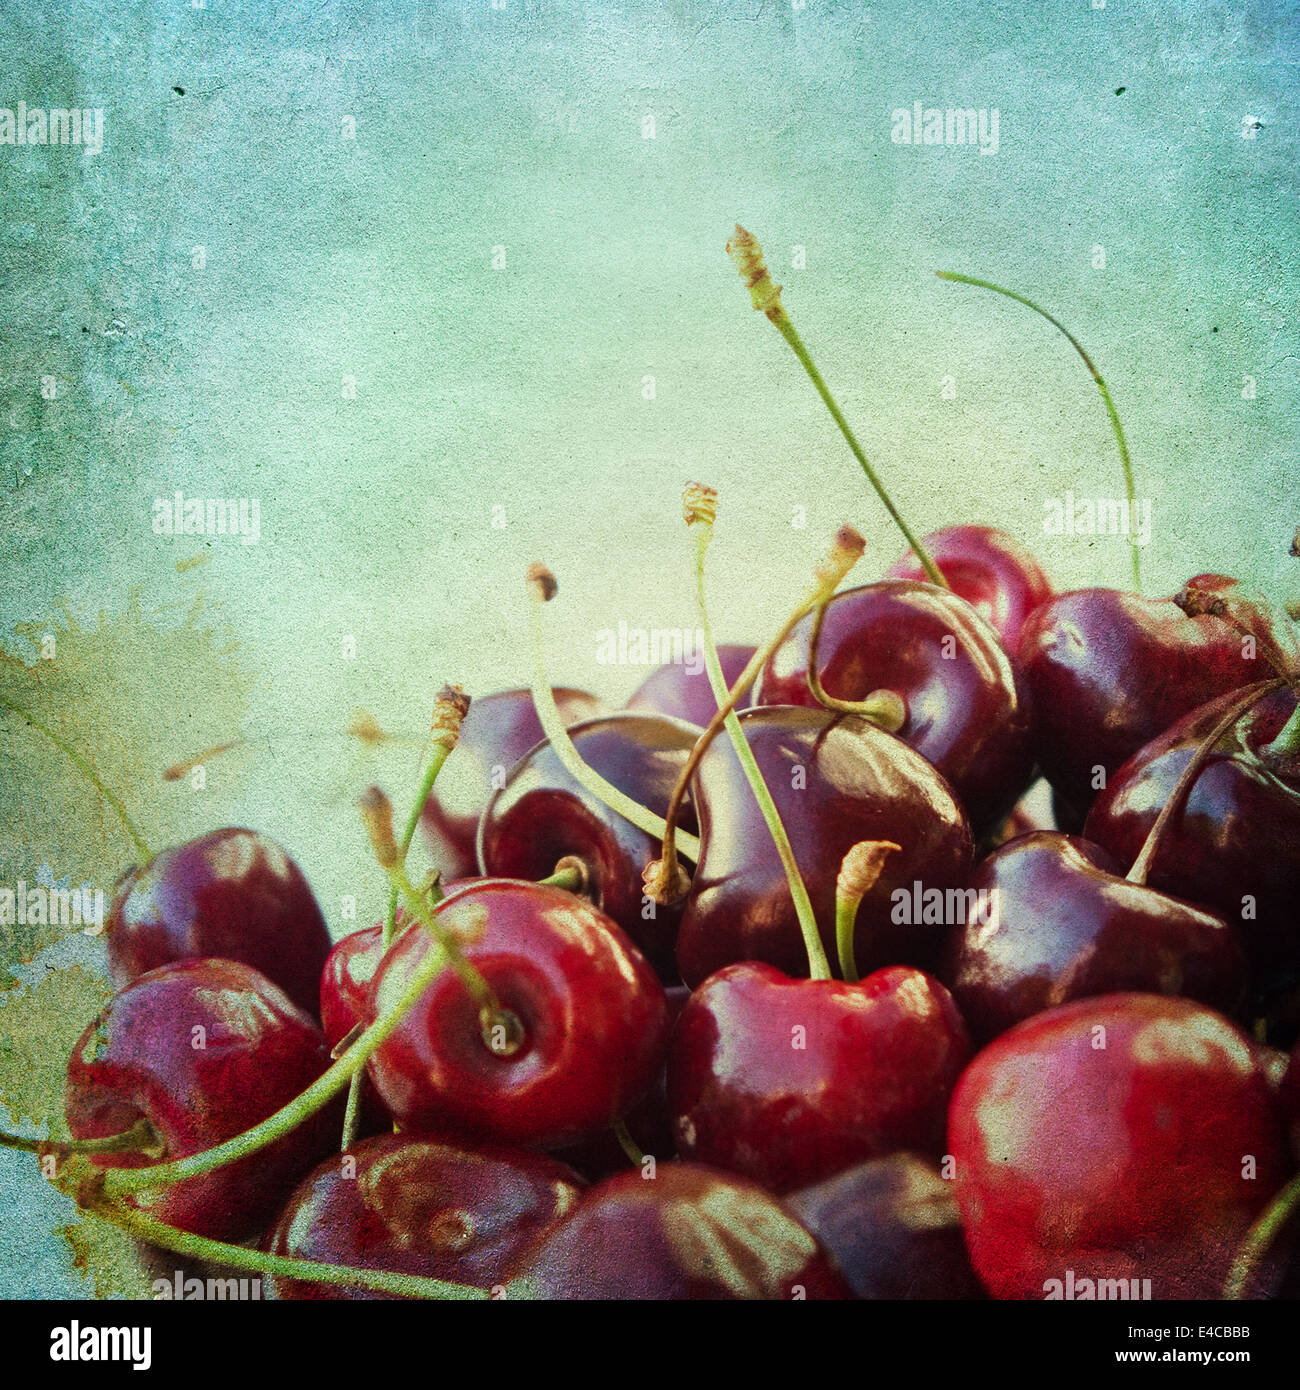 Vintage background with cherries Stock Photo